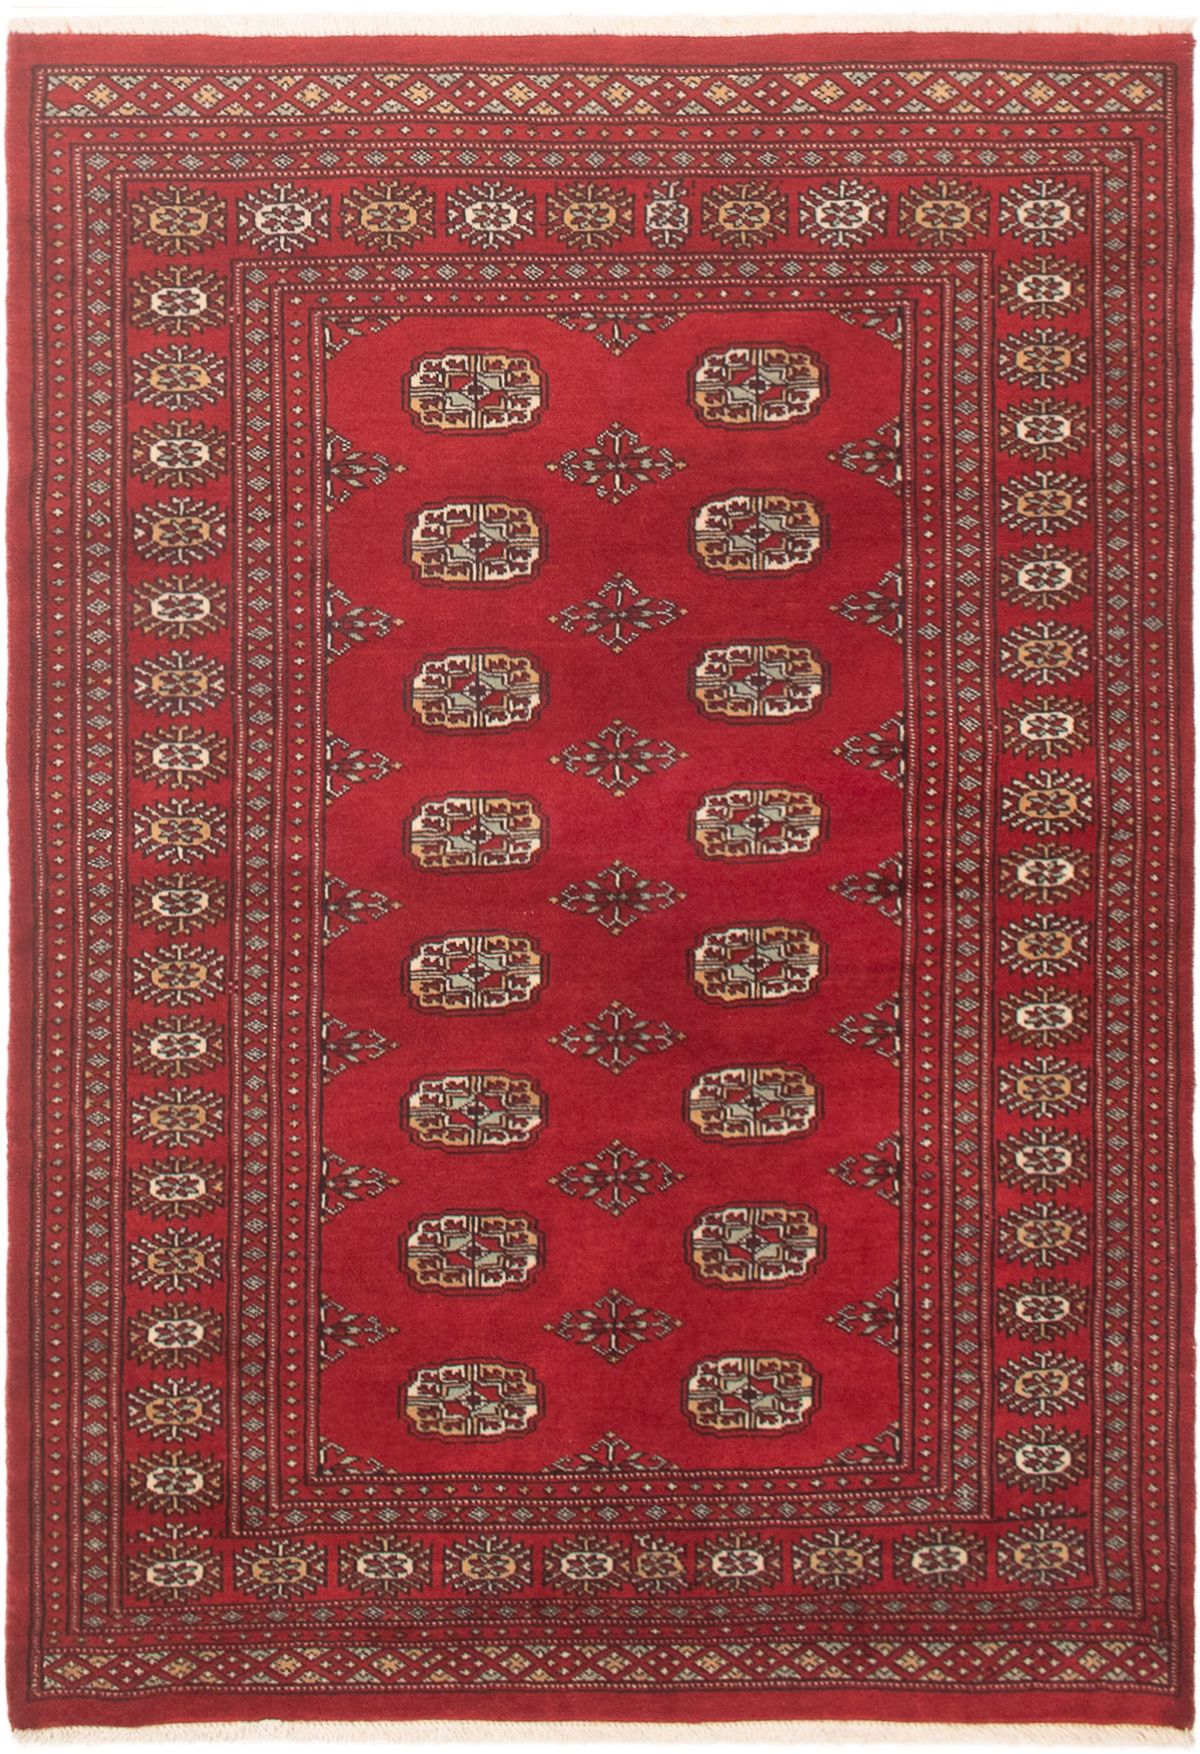 Hand-knotted Finest Peshawar Bokhara Red Wool Rug 4'2" x 5'11"  Size: 4'2" x 5'11"  